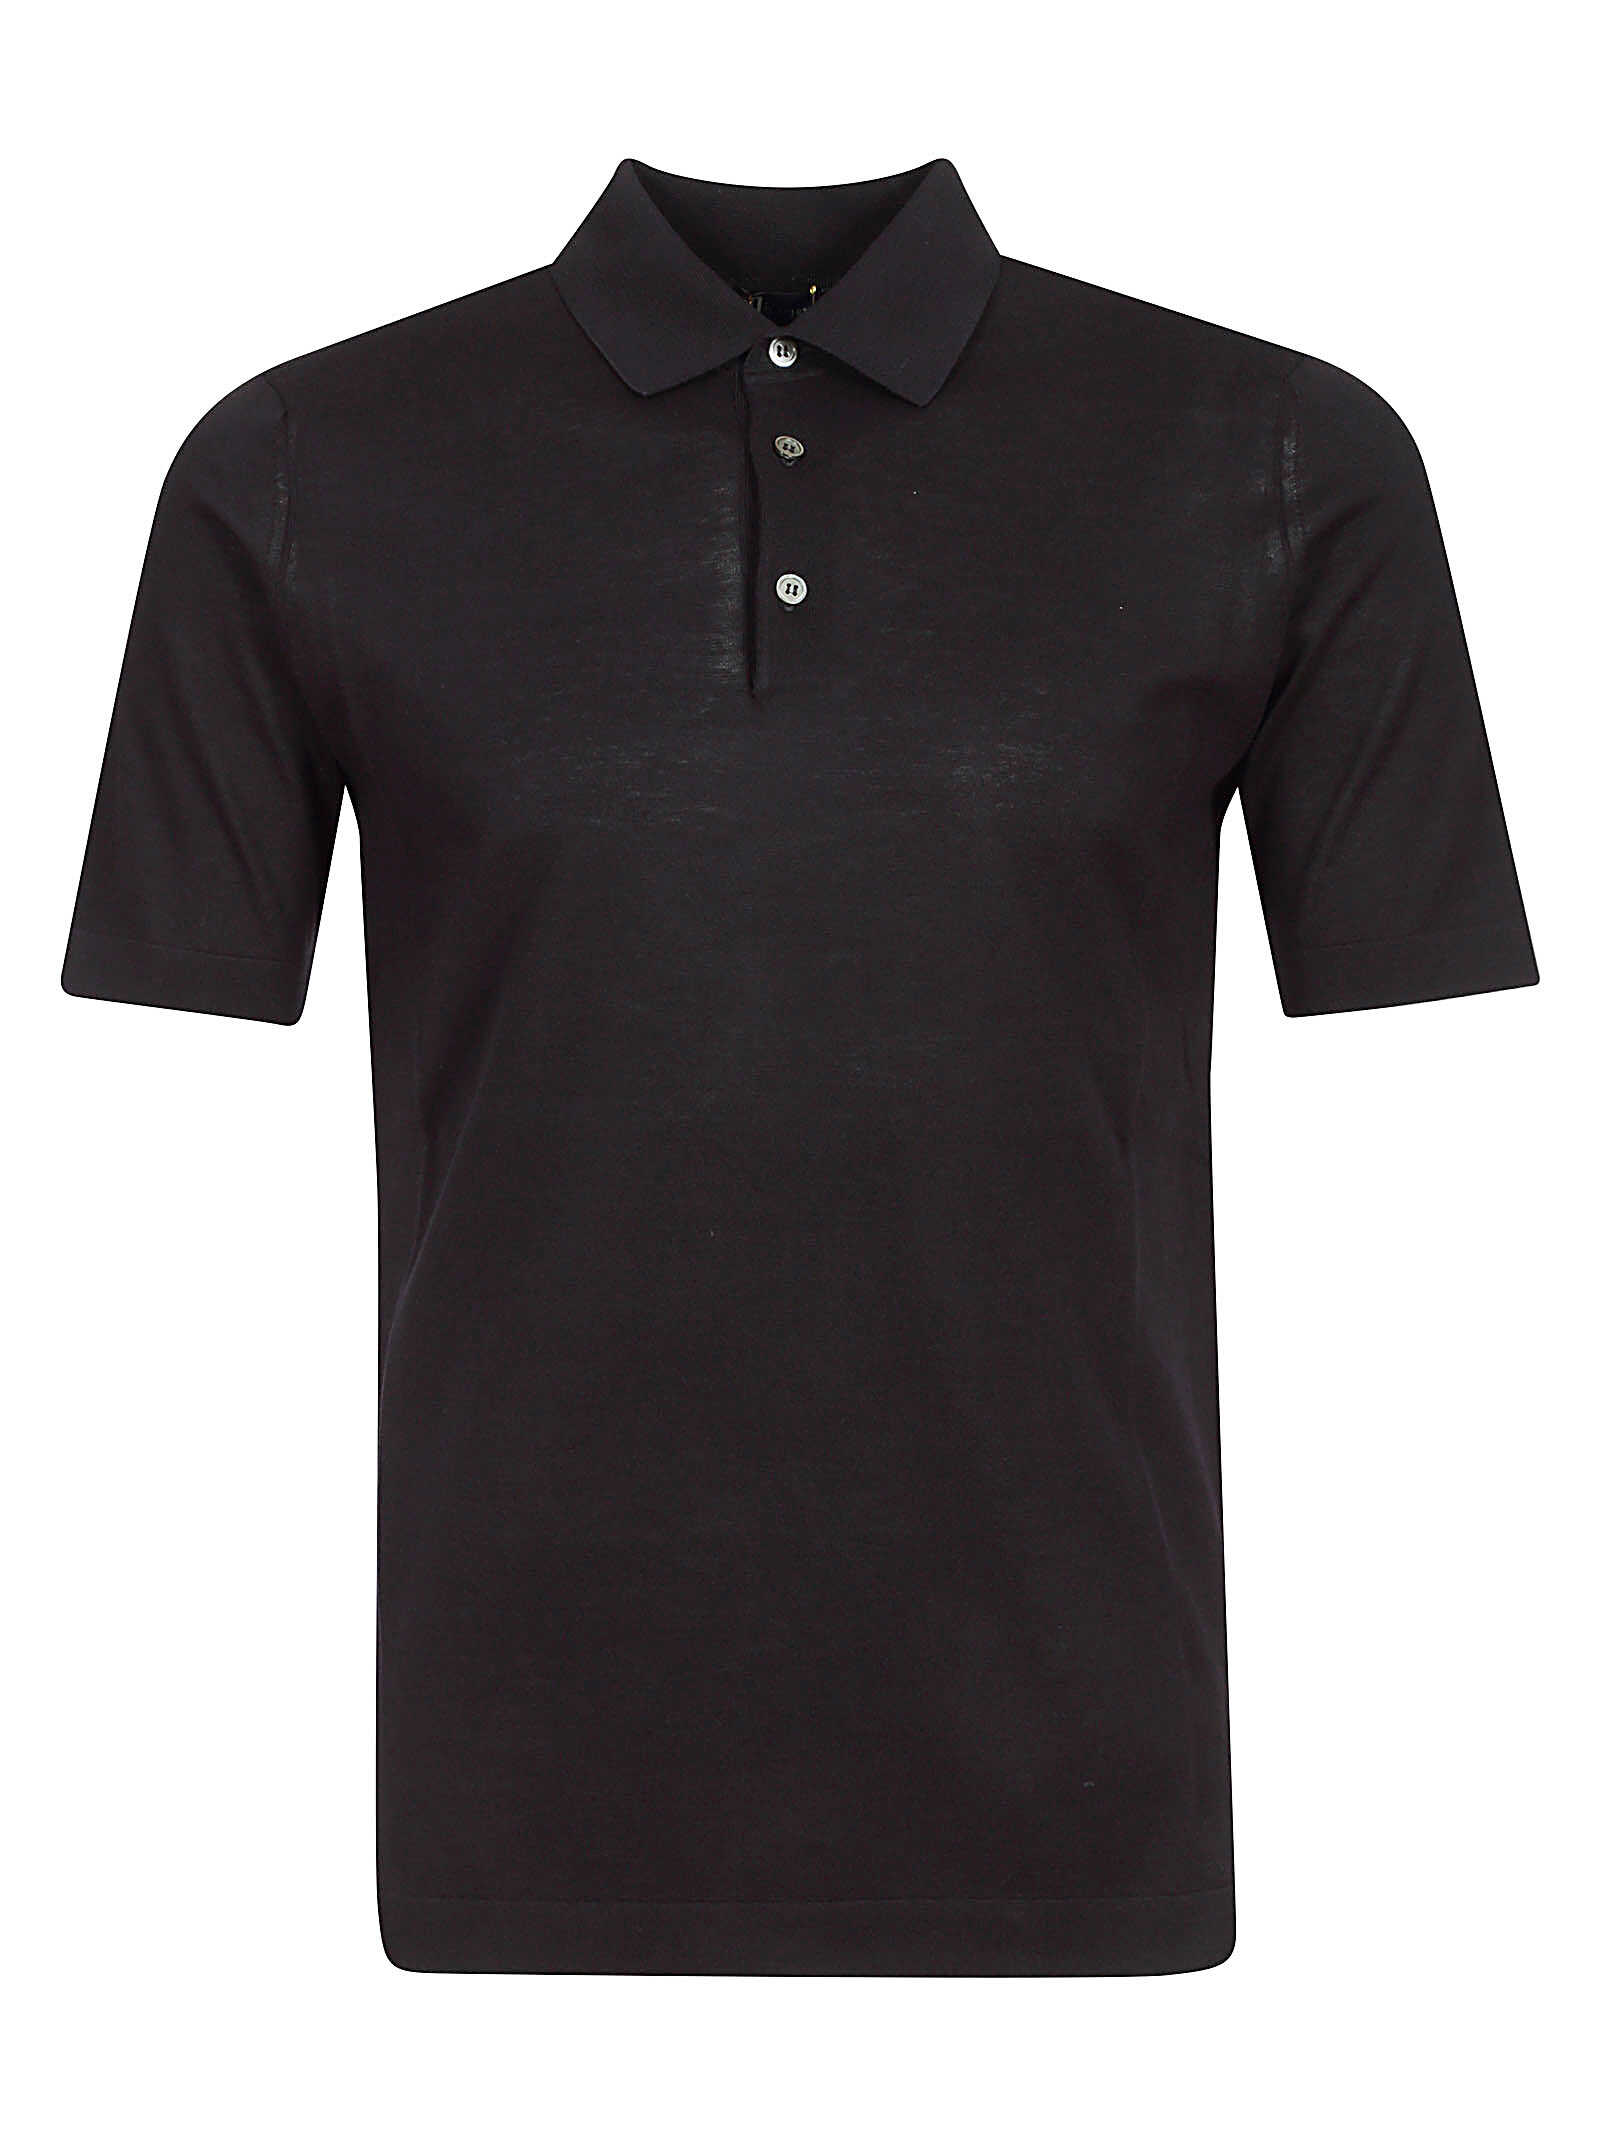 HINDUSTRIE Hindustrie polo PL0MC.SL21R 890 Navy Notte Navy Notte